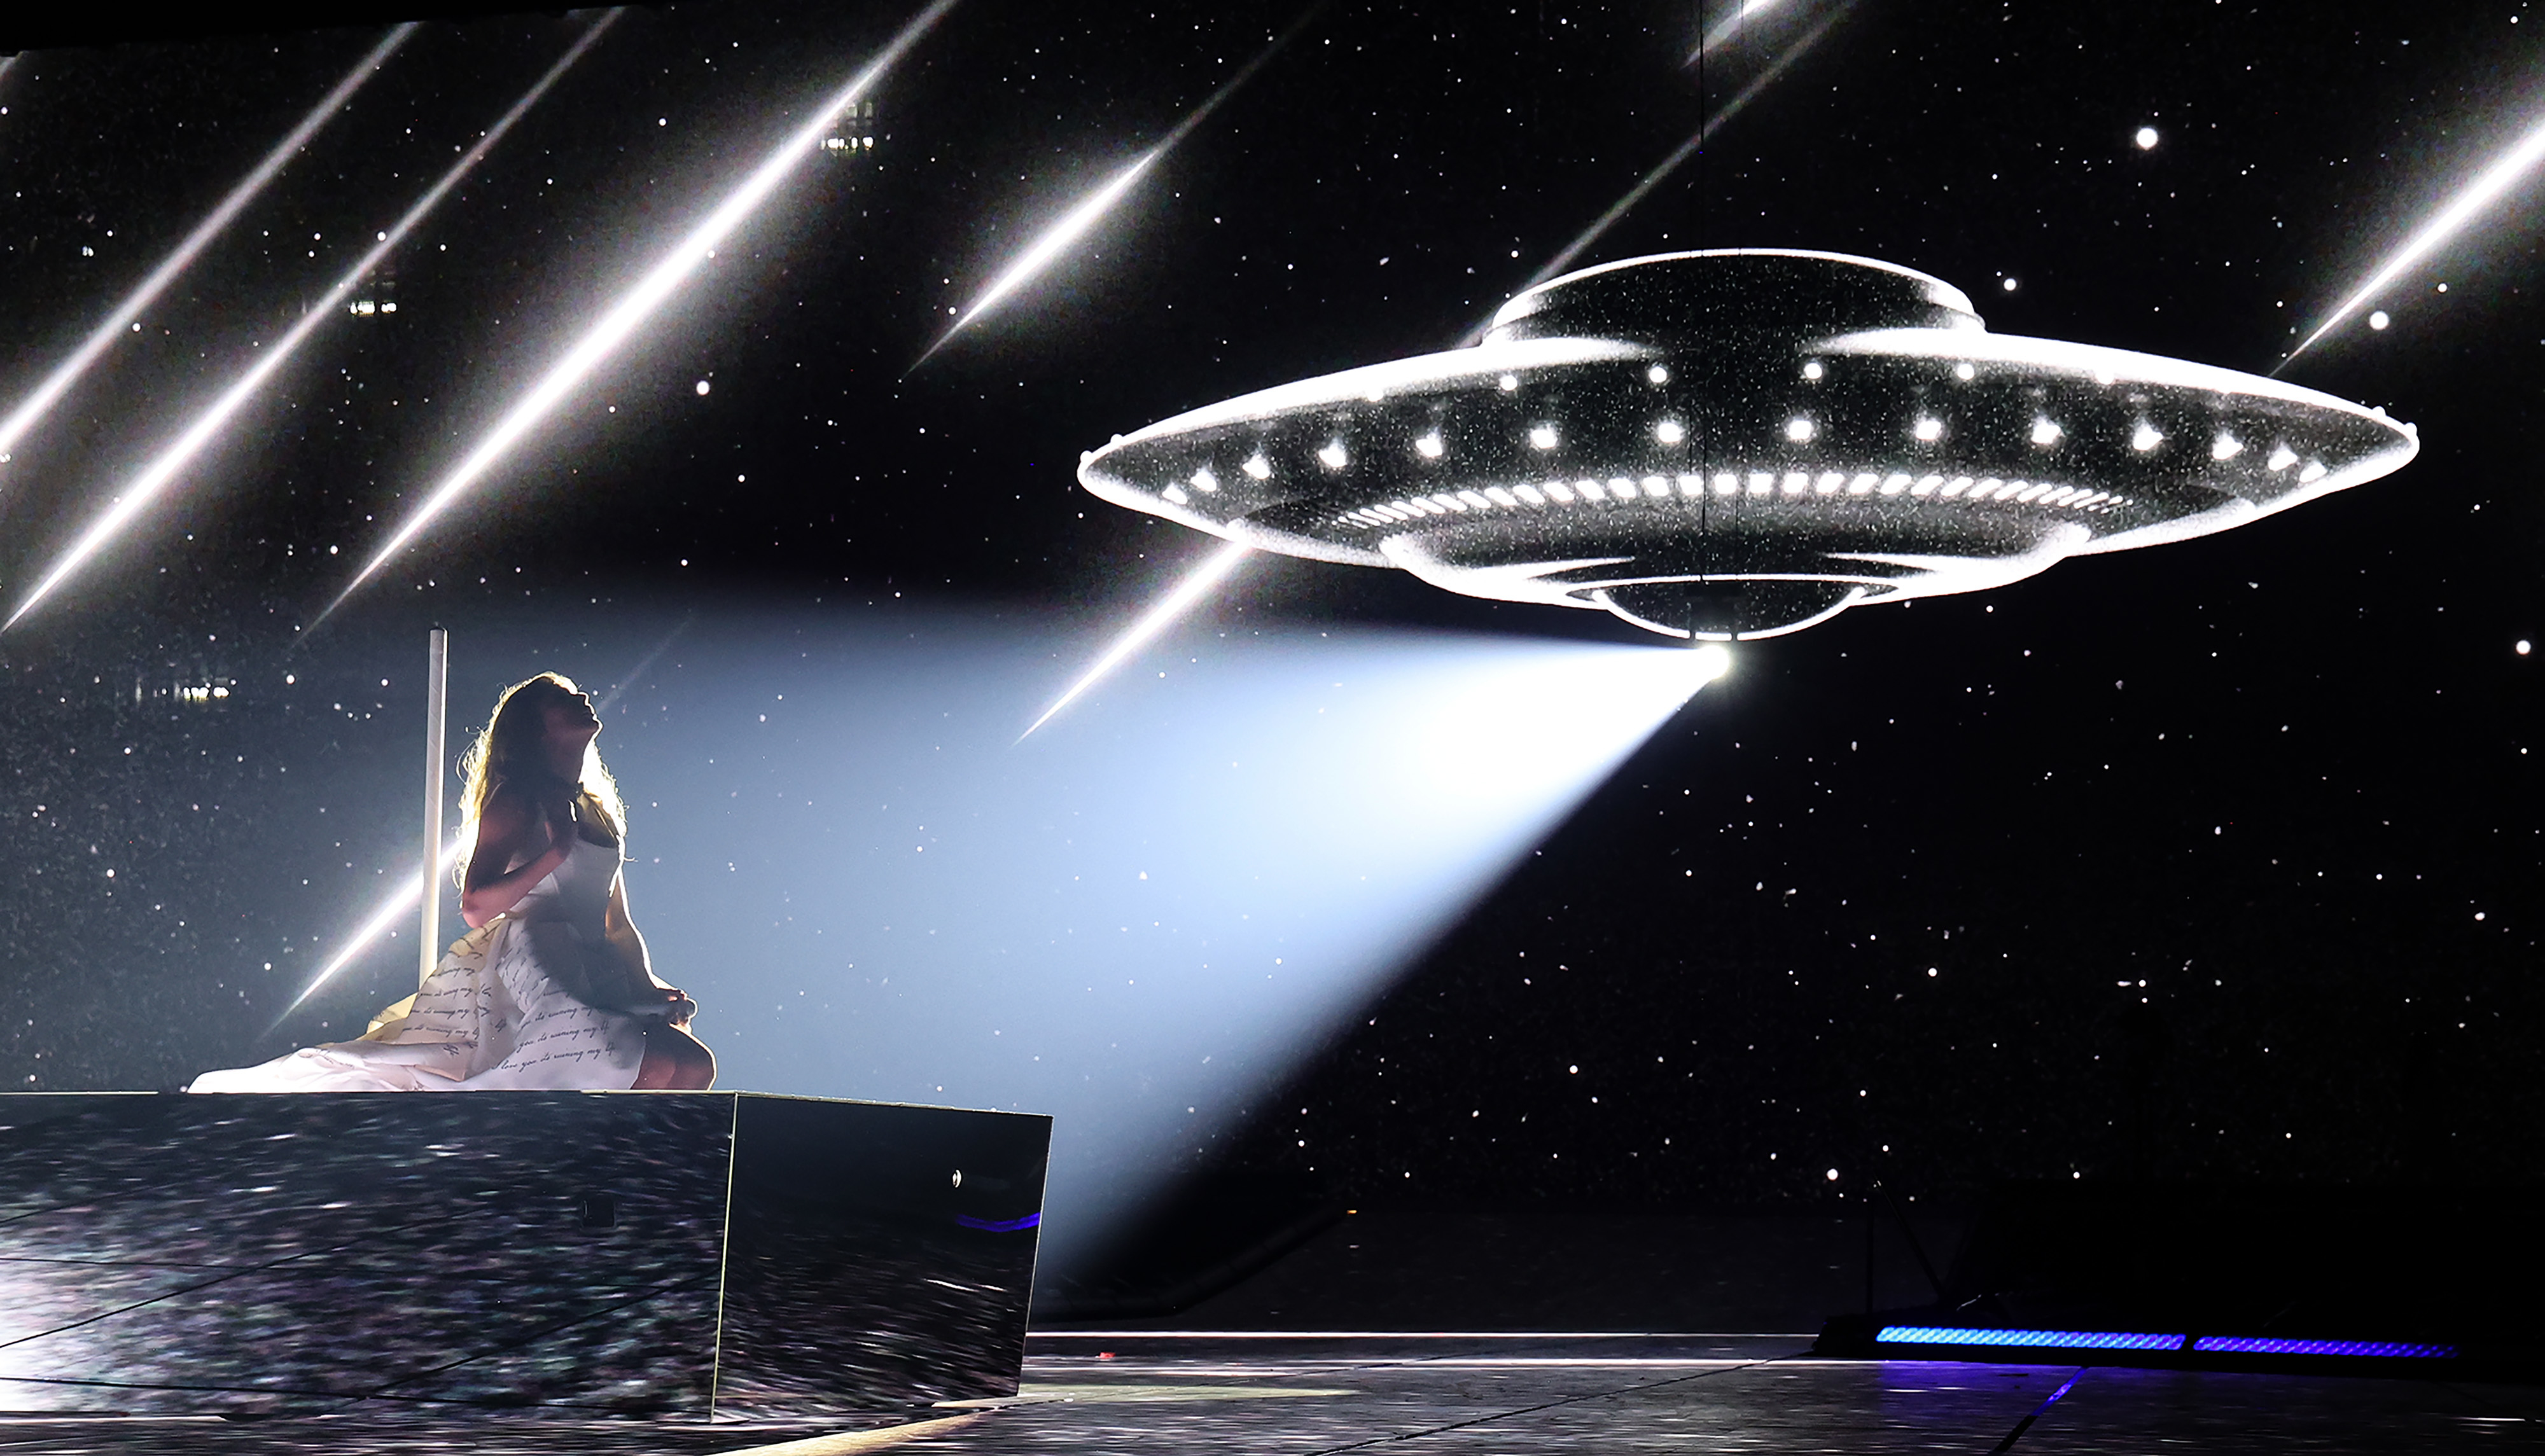 Taylor Swift sits on stage under a spotlight with a UFO prop hovering above